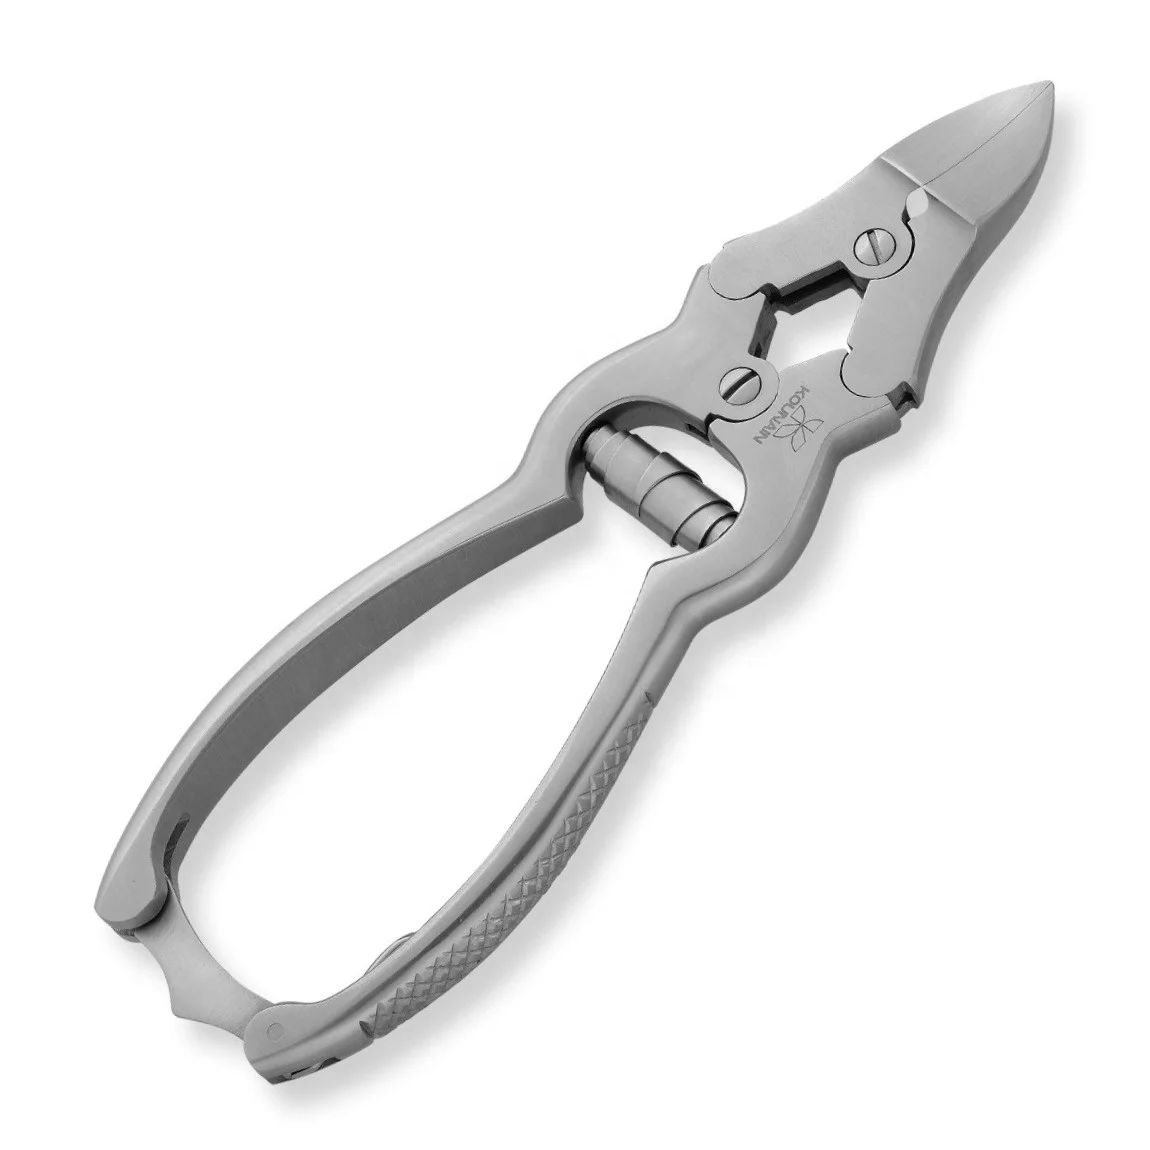 Chiropody Podiatry Nail Clippers/Nippers Free P&P UK Stainless Steel 